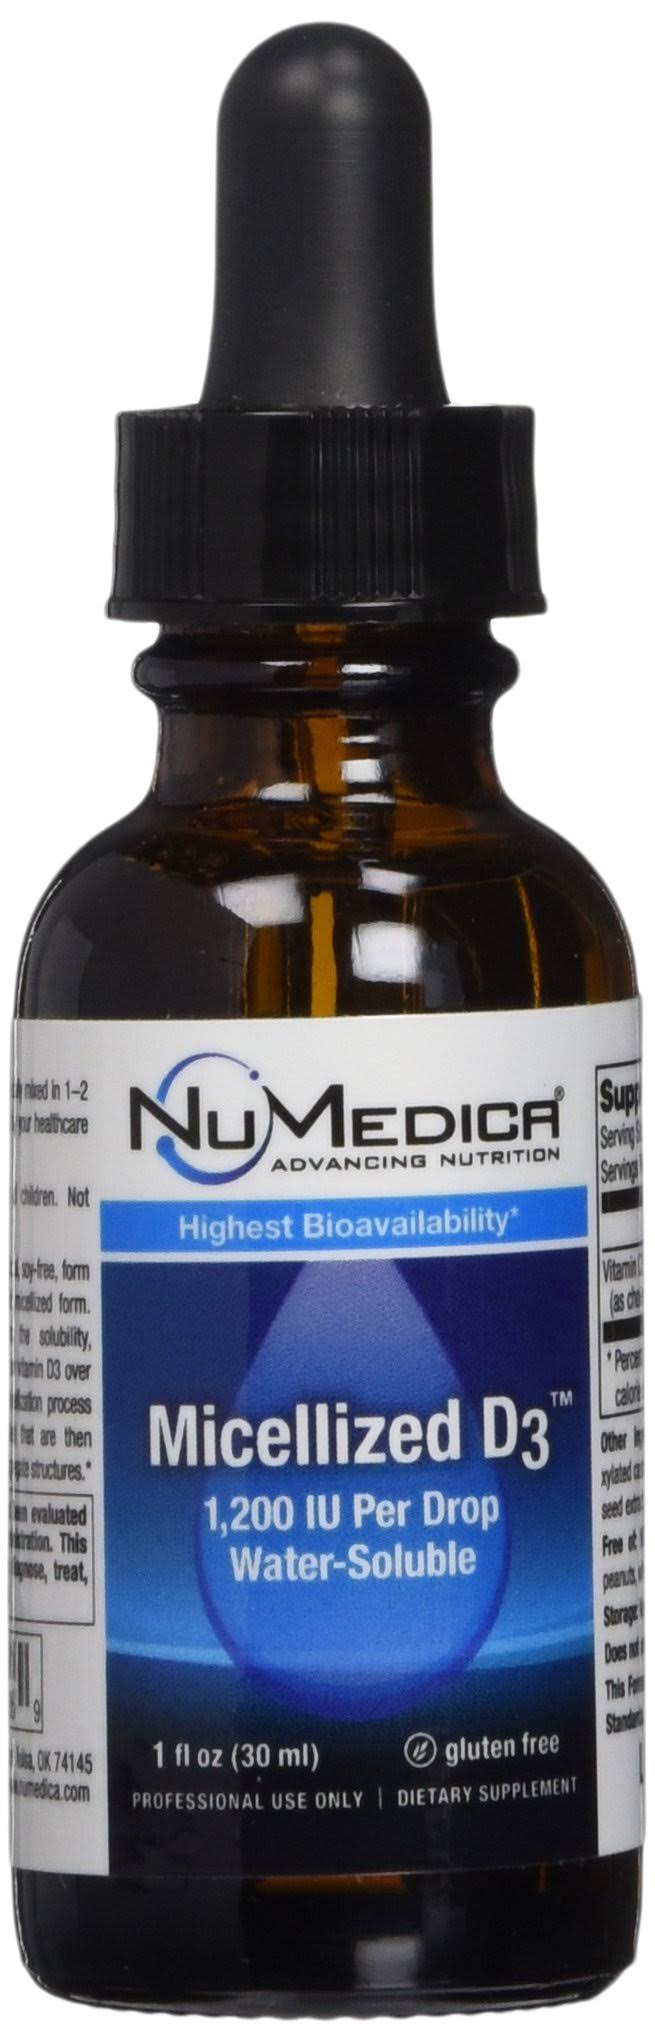 NuMedica Micellized D3 1200­ Dietary Supplement - 30ml